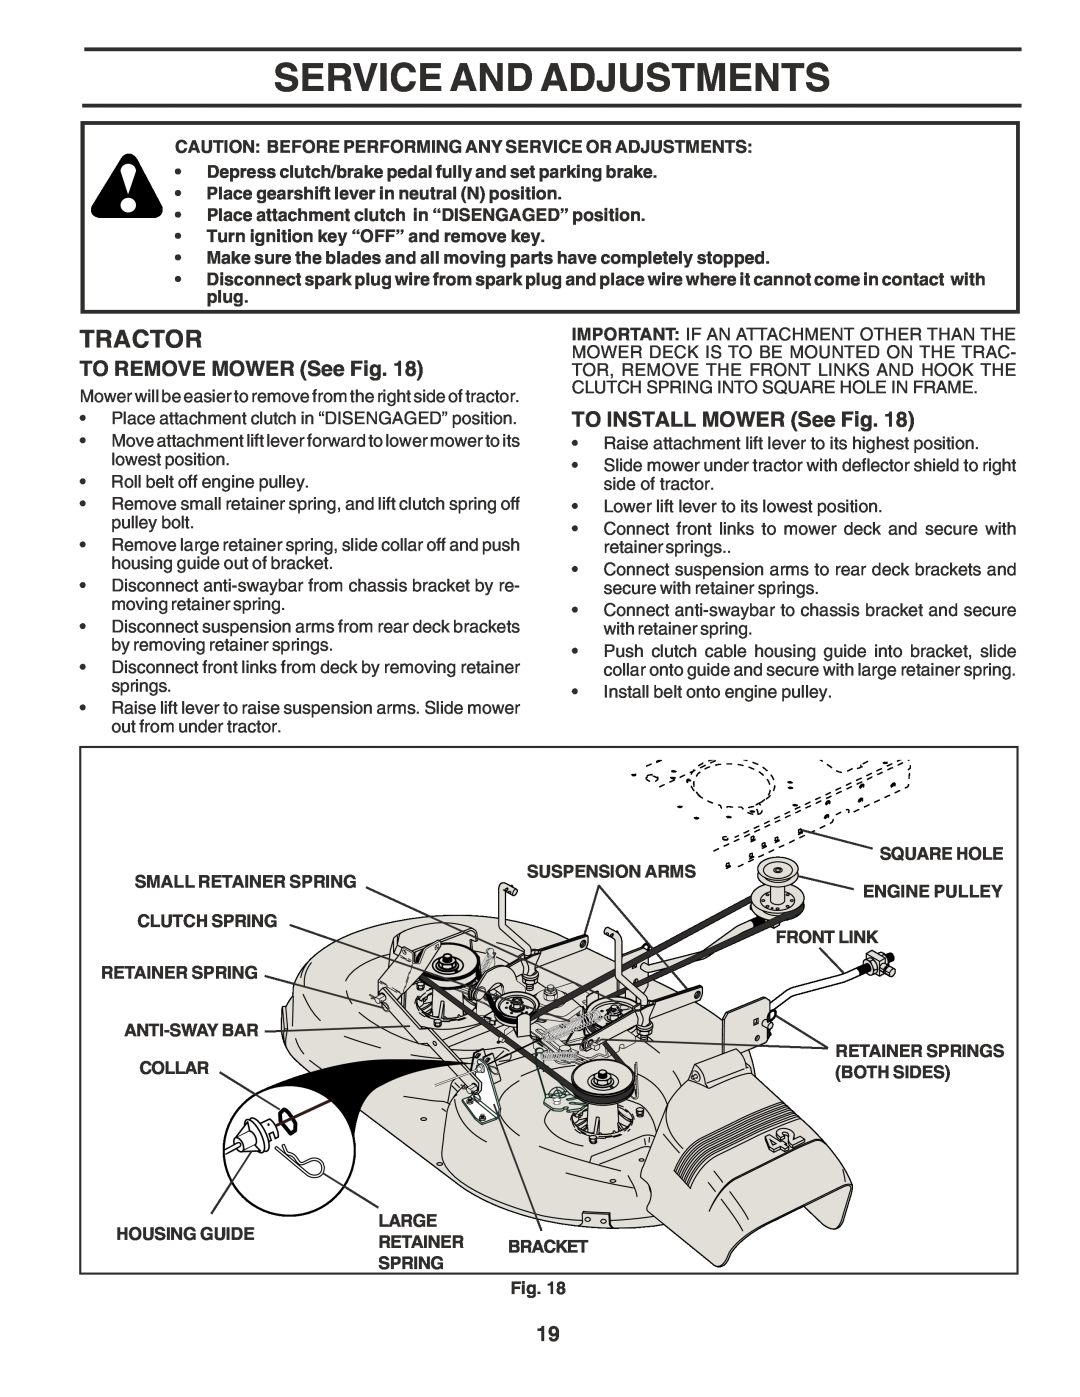 Poulan PR1742STF owner manual Service And Adjustments, TO REMOVE MOWER See Fig, TO INSTALL MOWER See Fig, Tractor 